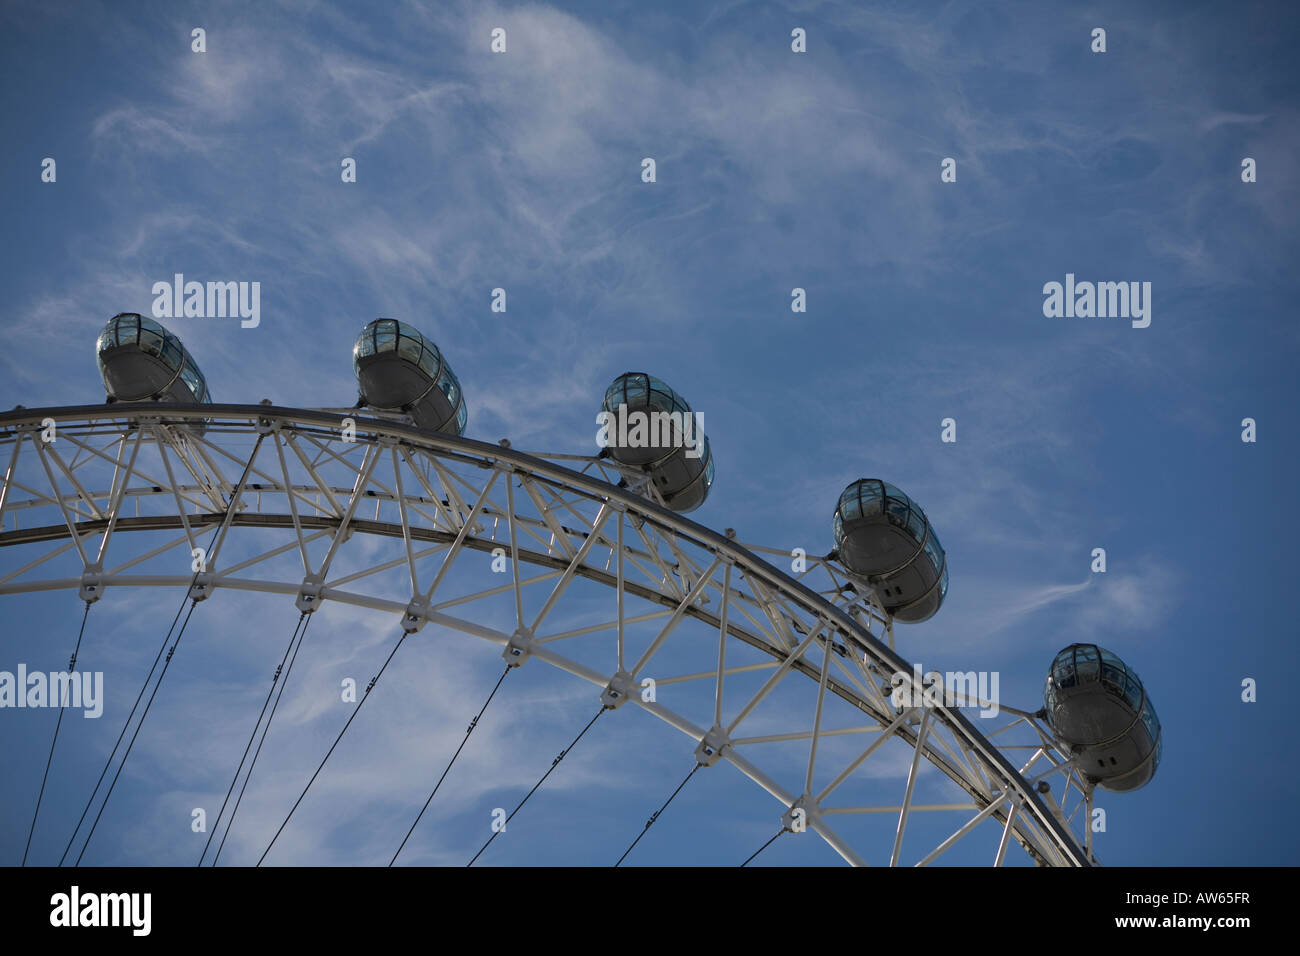 The British Airways London Eye tourist attraction on the south bank of the River Thames in London with a blue sky and cirrus clo Stock Photo